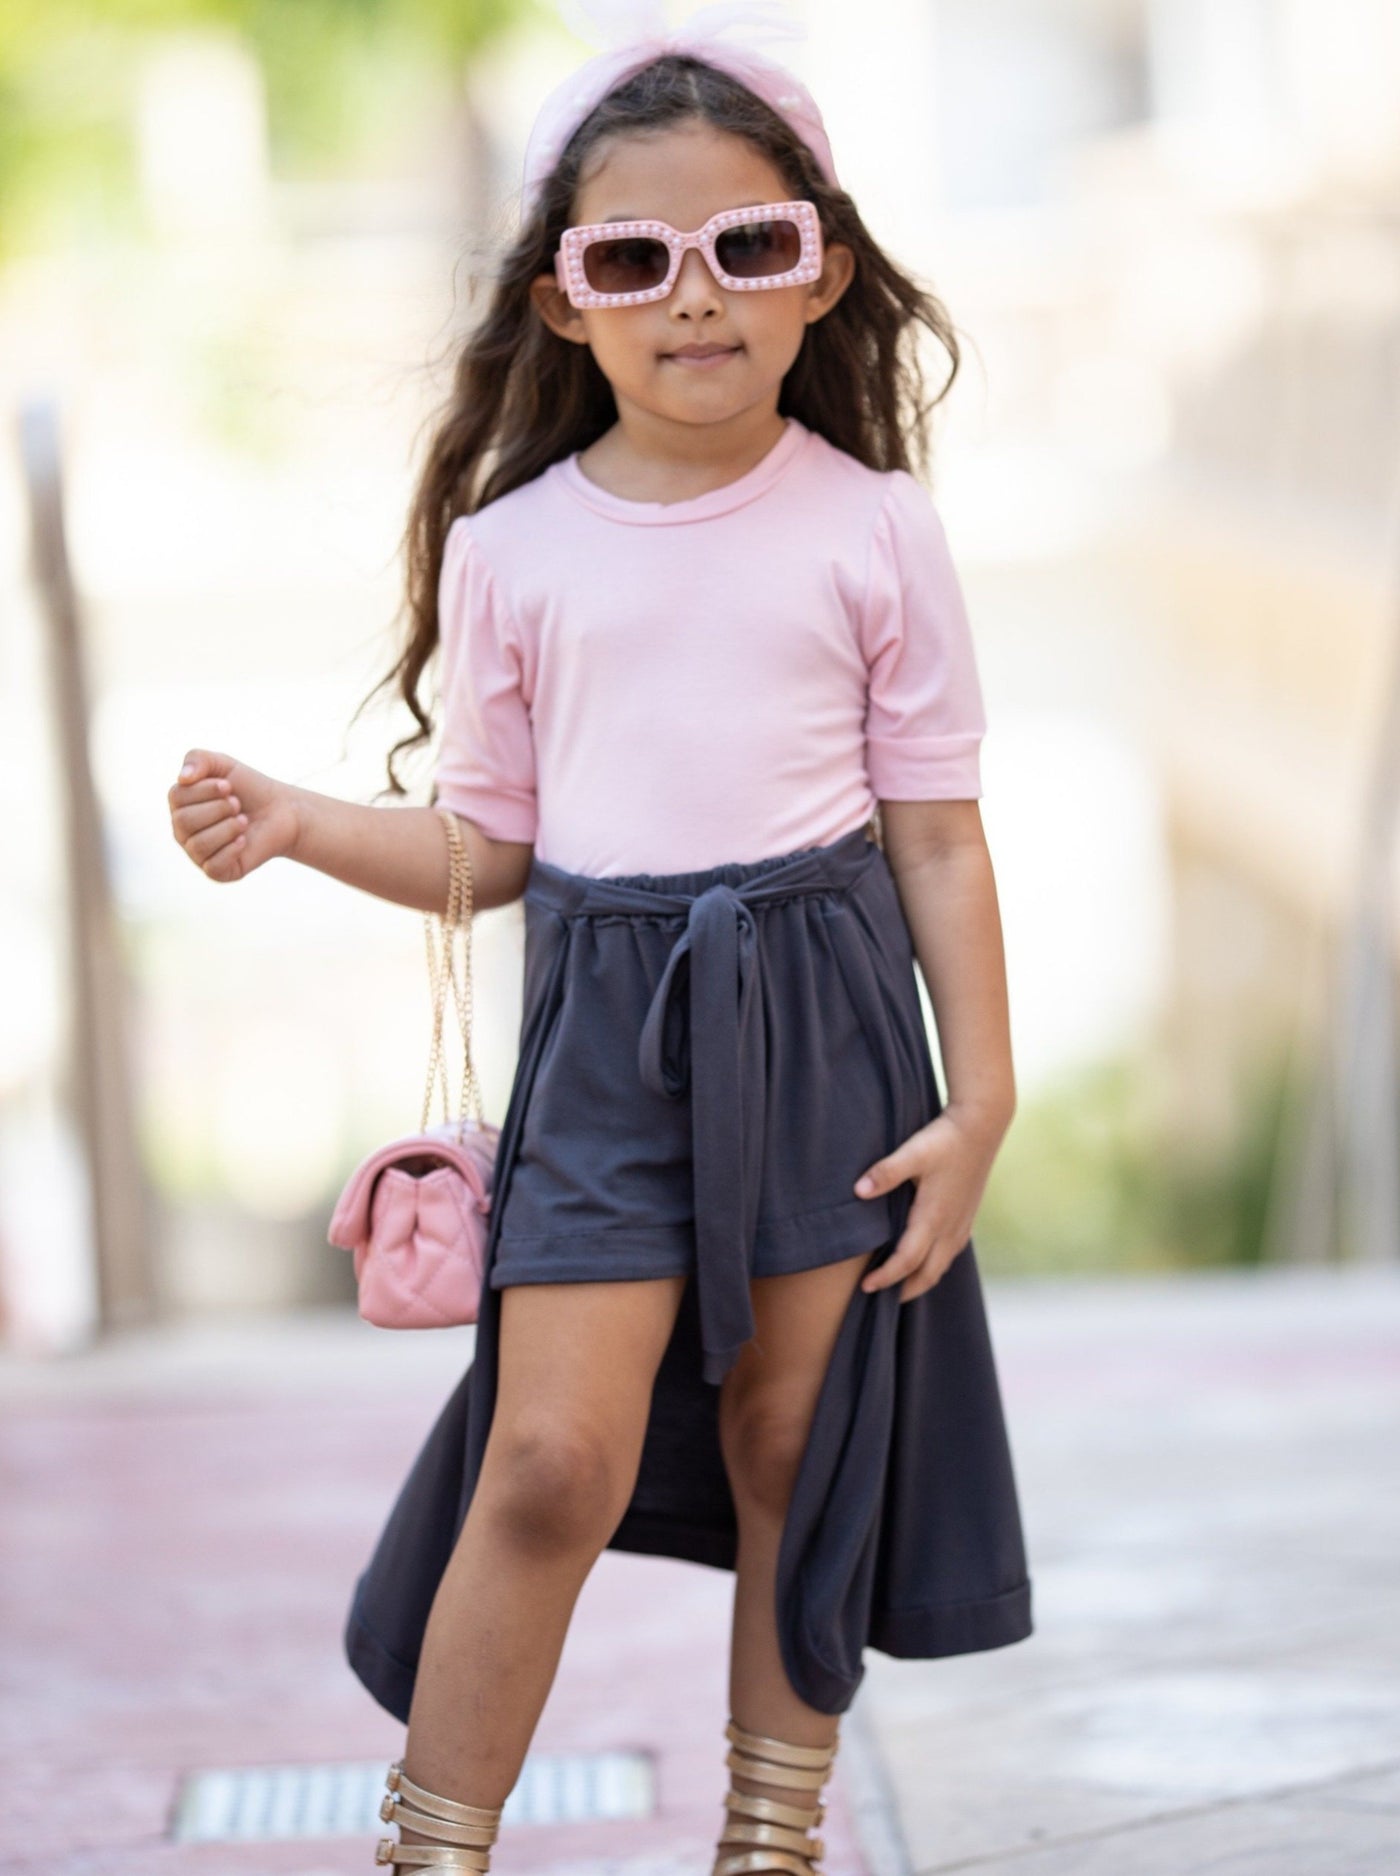 Spring Three Piece Outfits | Girls Top, Shorts & Wrap Skirt Set